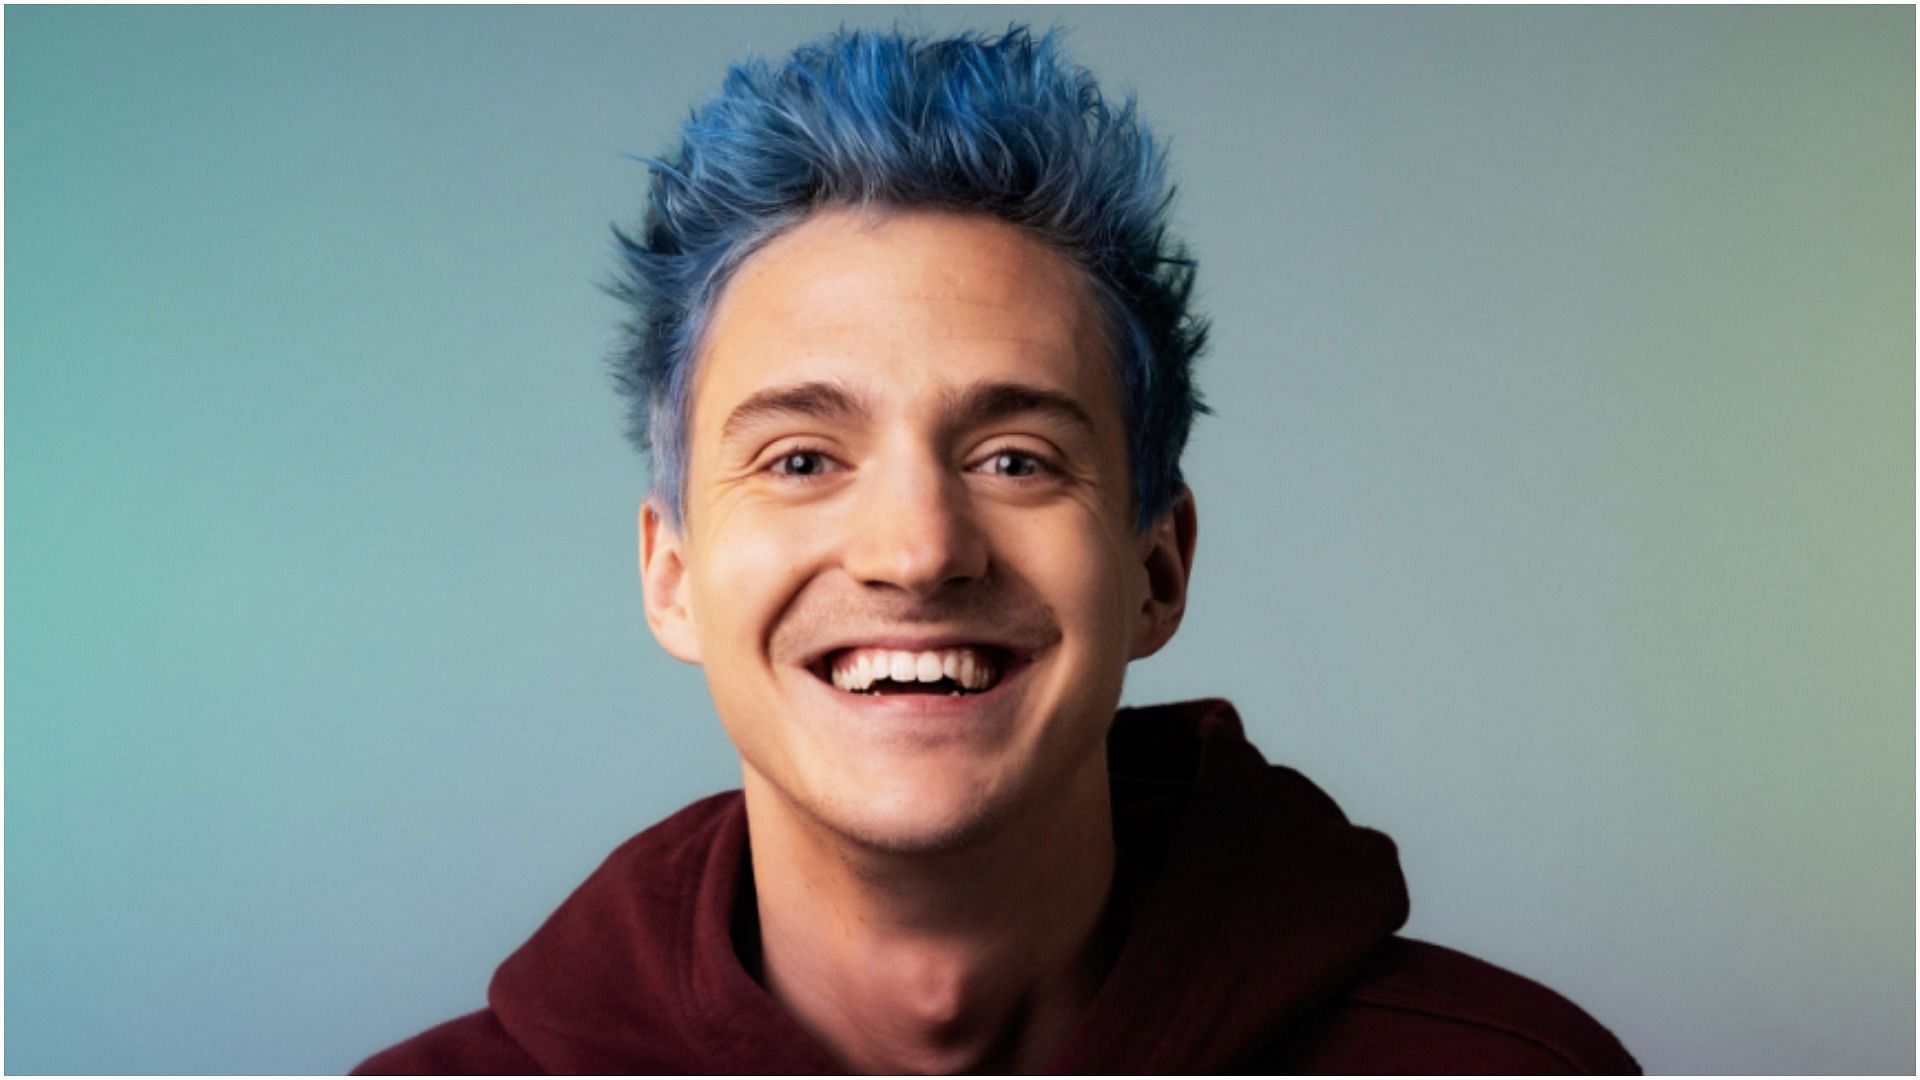 Ninja&#039;s rebranding announcement received mixed reviews from fans (Image via Ninja/Twitter)